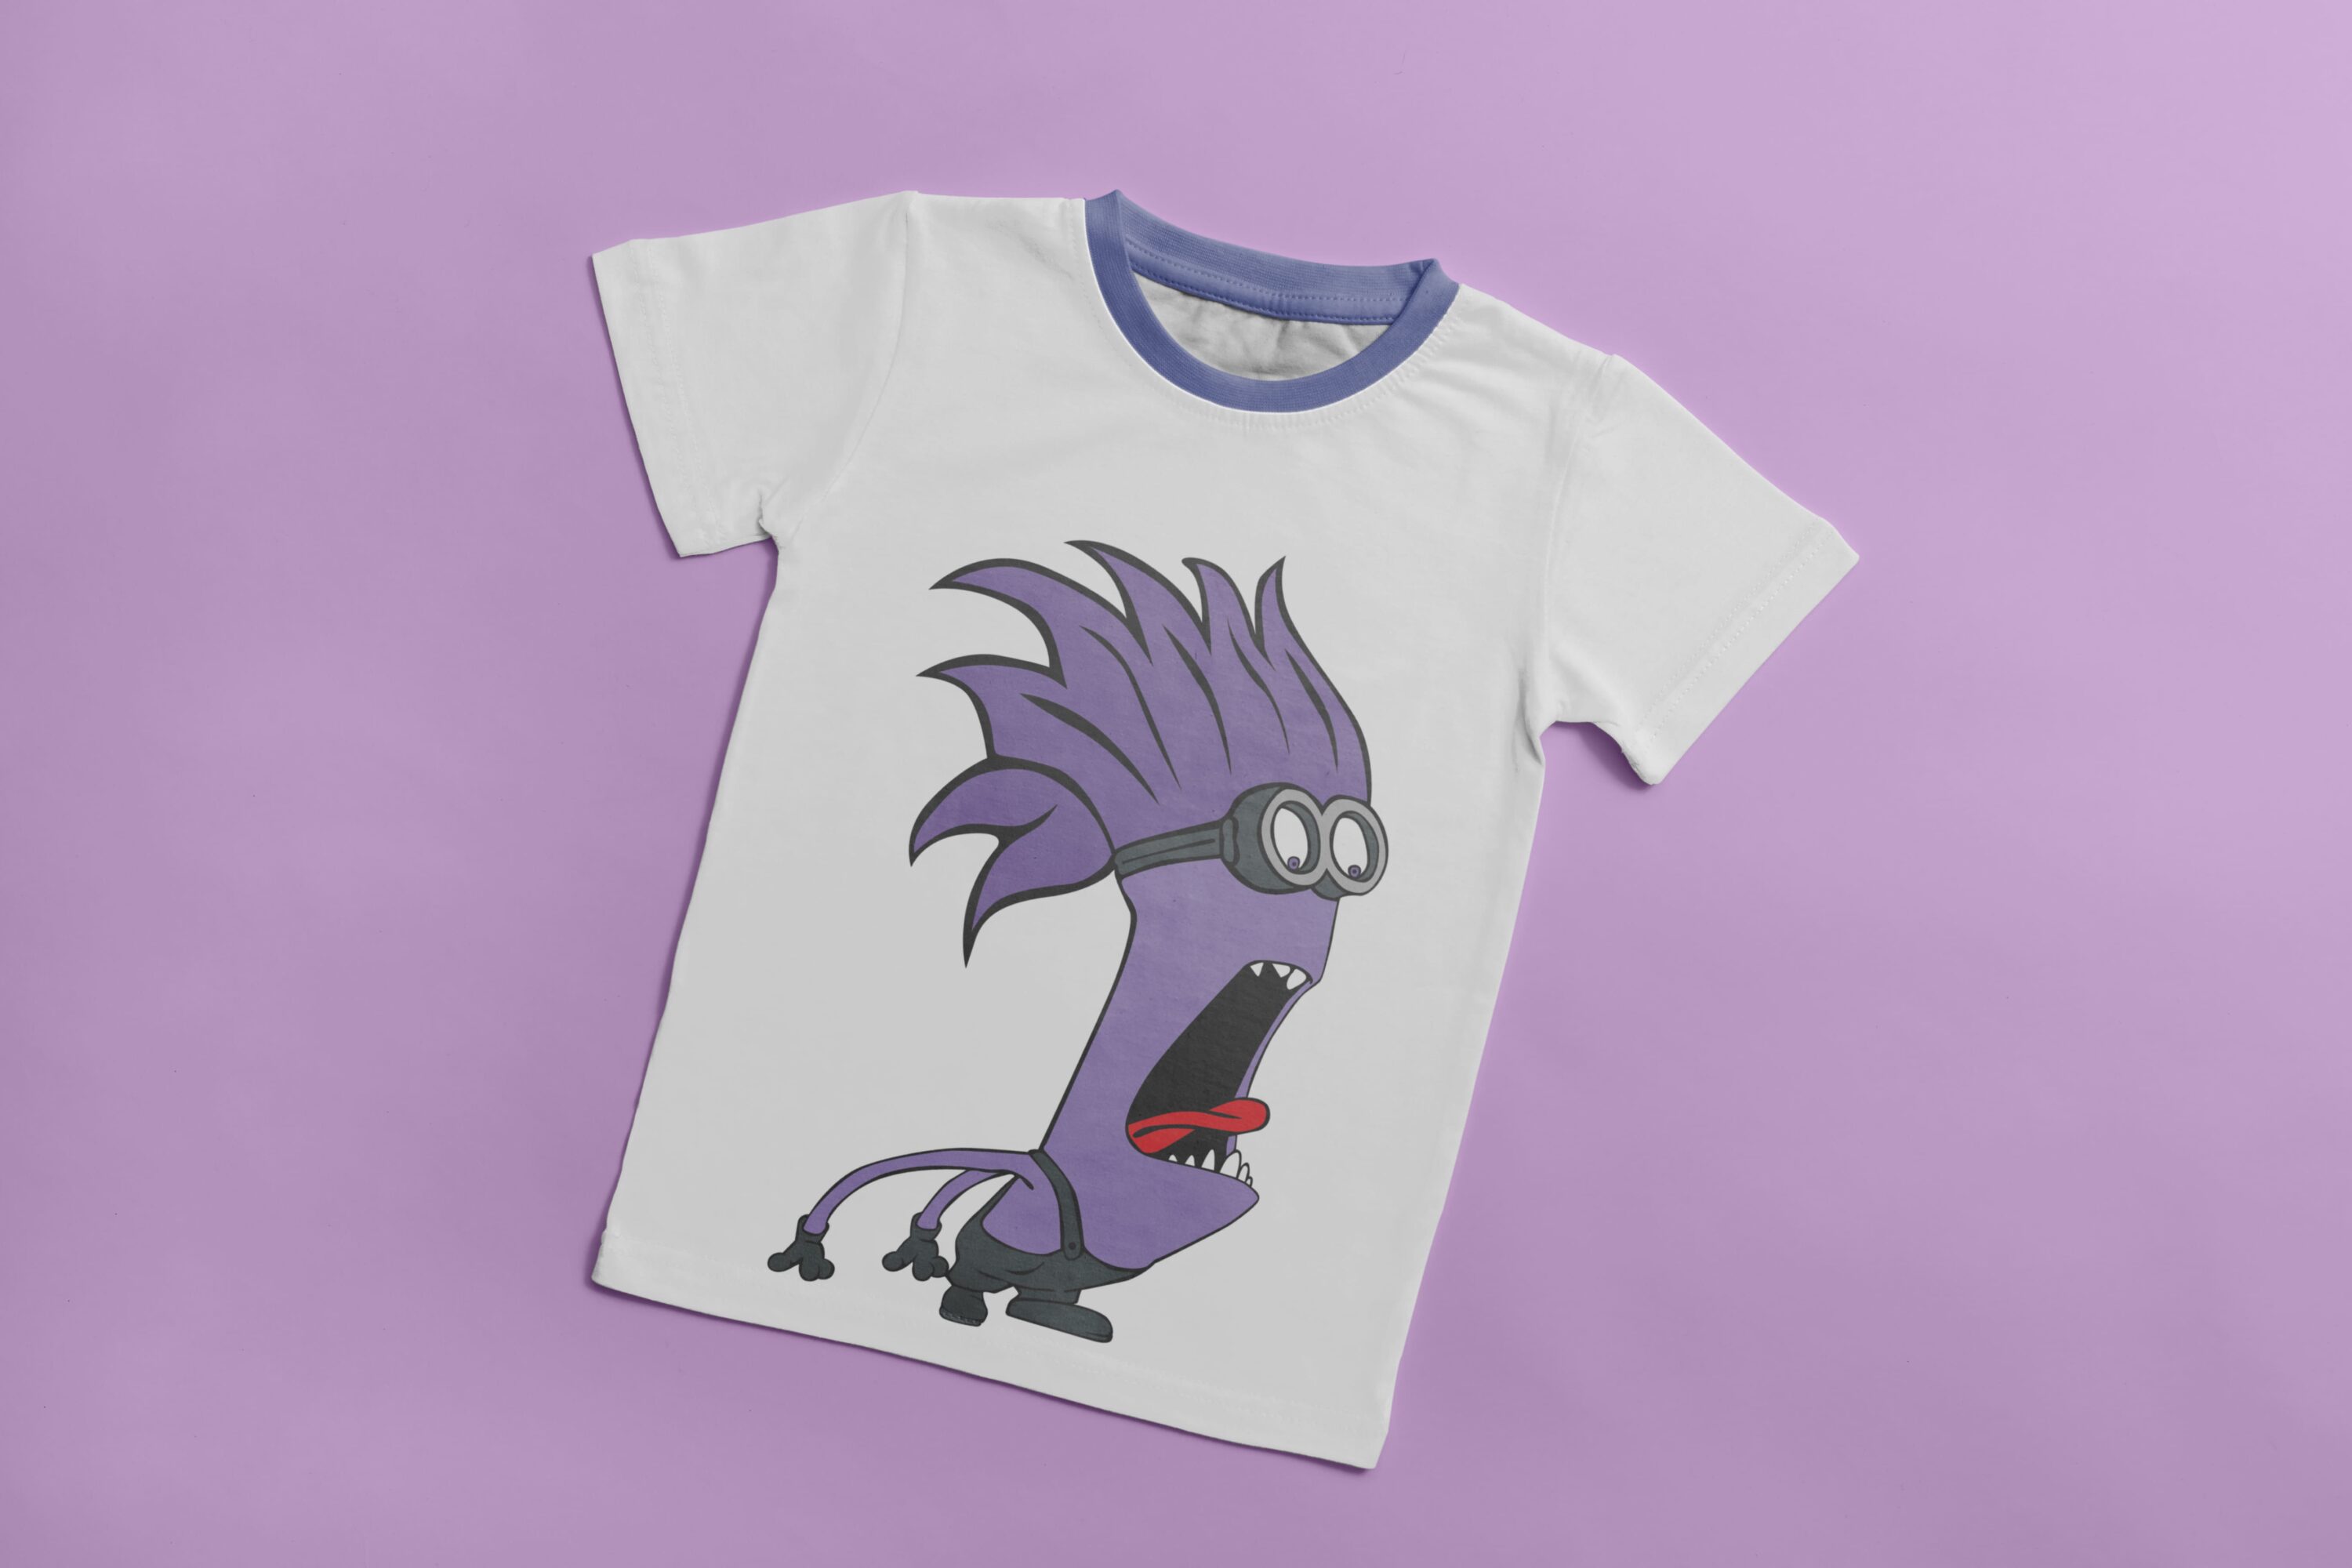 White T-shirt with a purple collar and an image surprised character Evil Minion.